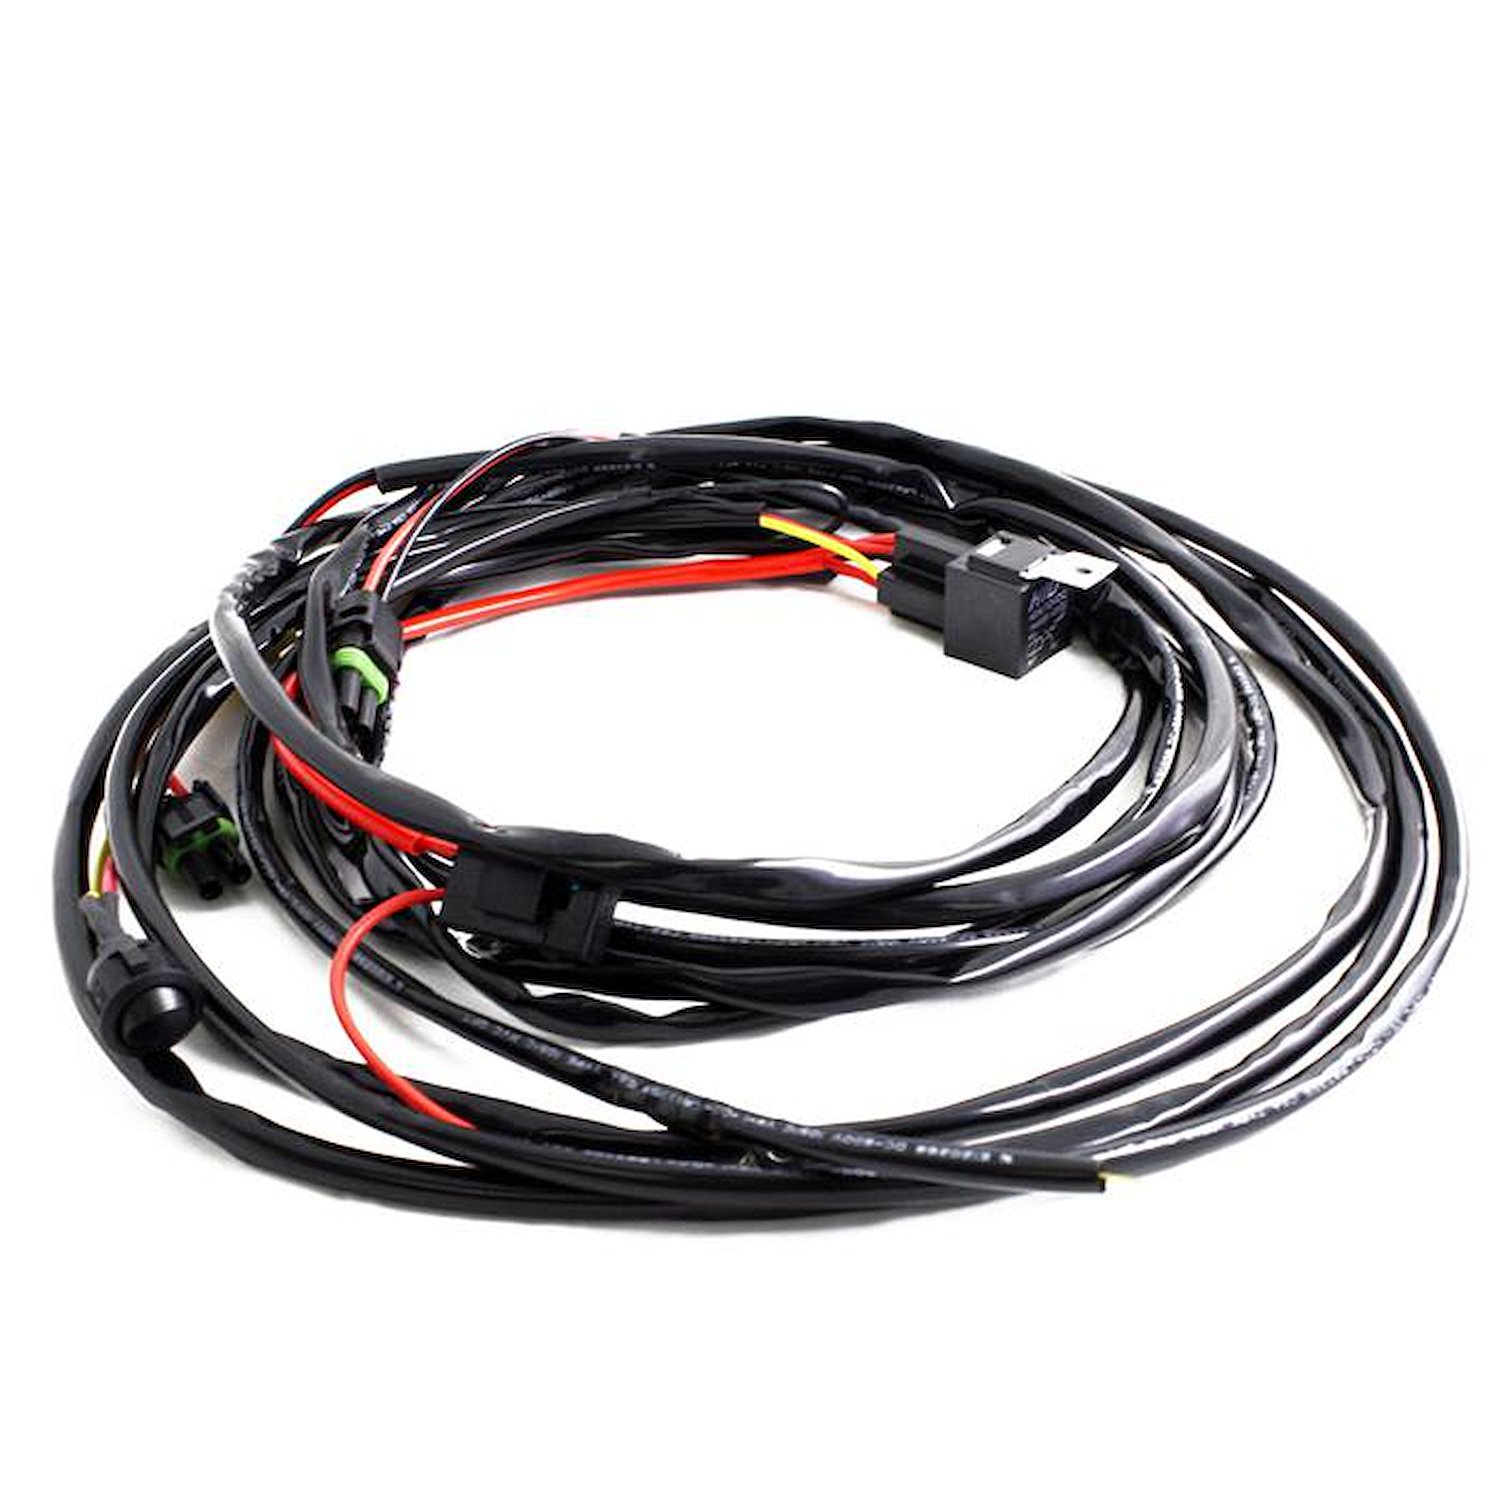 Squadron/S2 On/Off 2-Light Max (150 Watts) Wiring Harness [Universal]